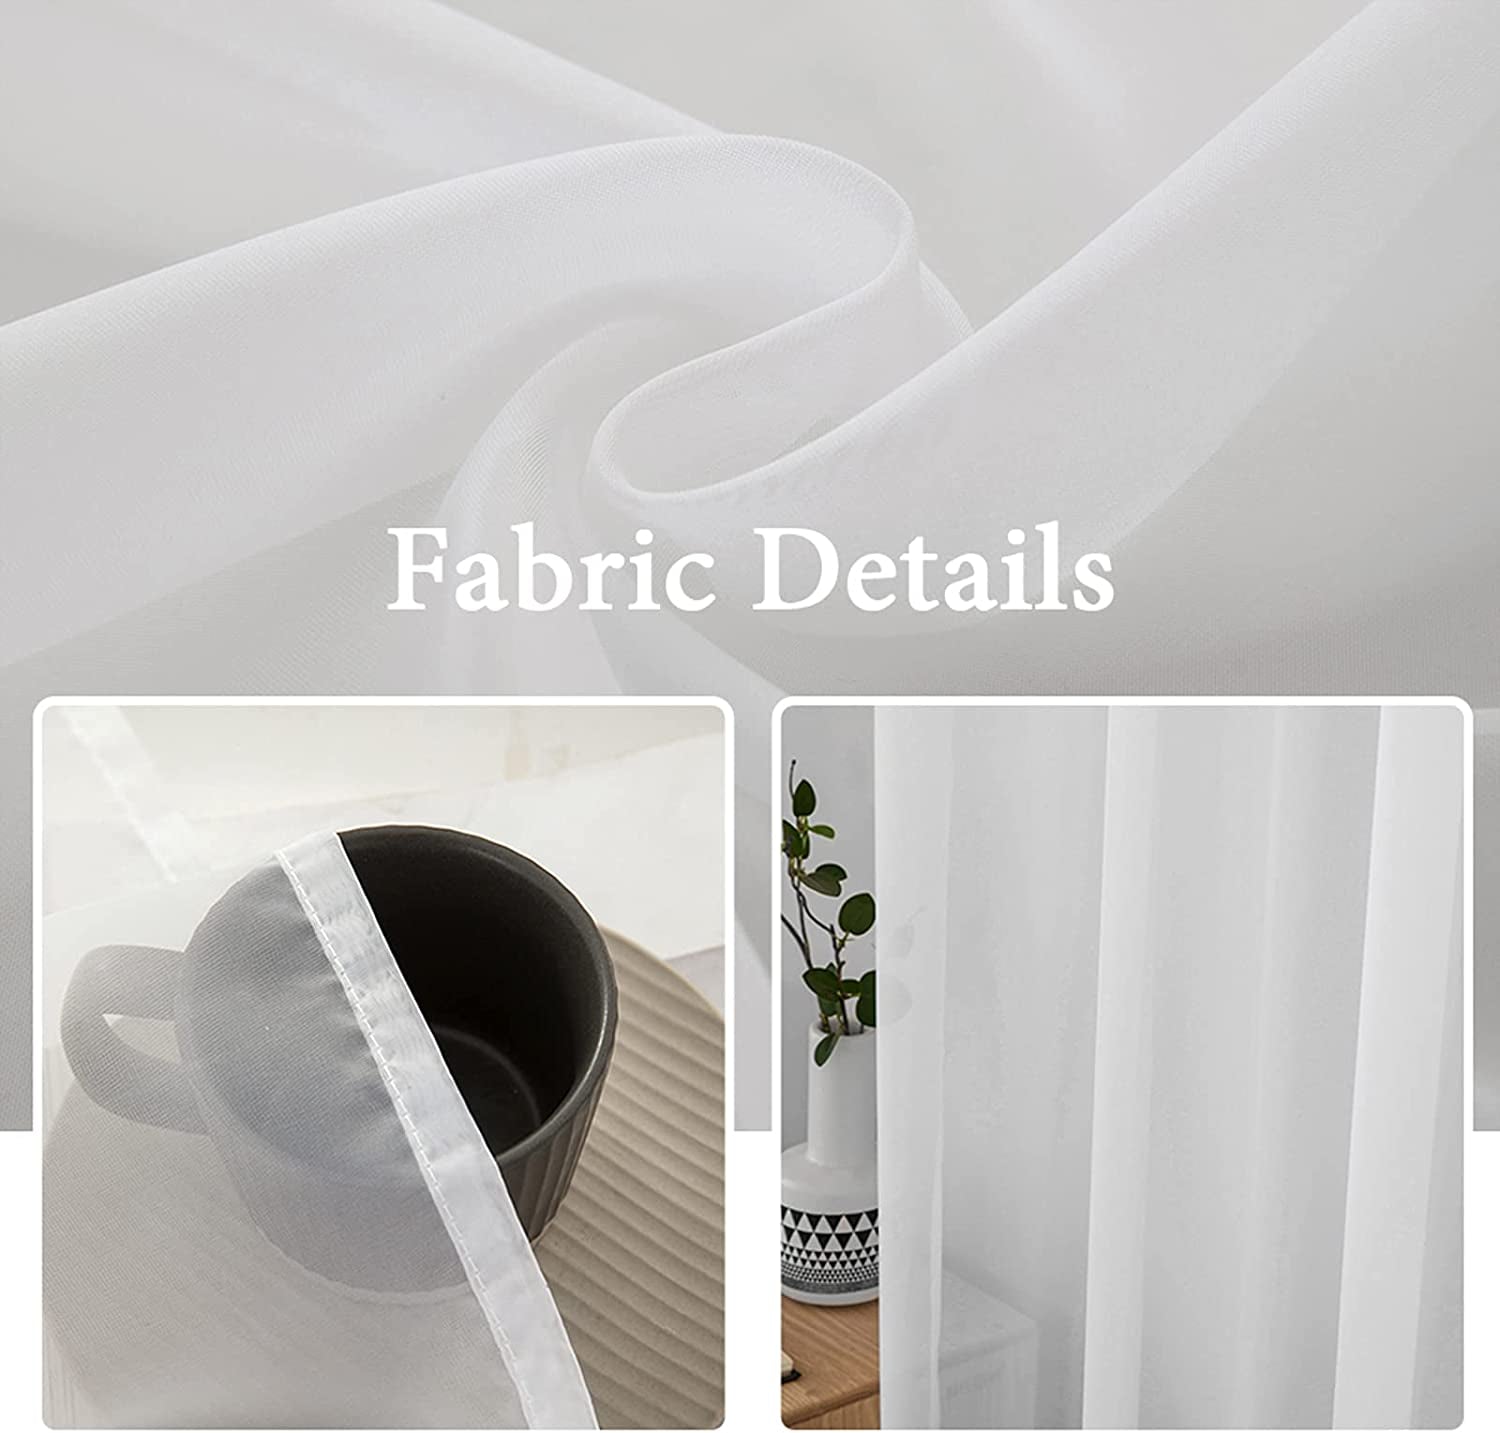 MIULEE White Sheer Curtains 96 Inches Long Window Curtains 2 Panels Solid Color Elegant Window Voile Panels/Drapes/Treatment for Bedroom Living Room (54 X 96 Inches White)  MIULEE   